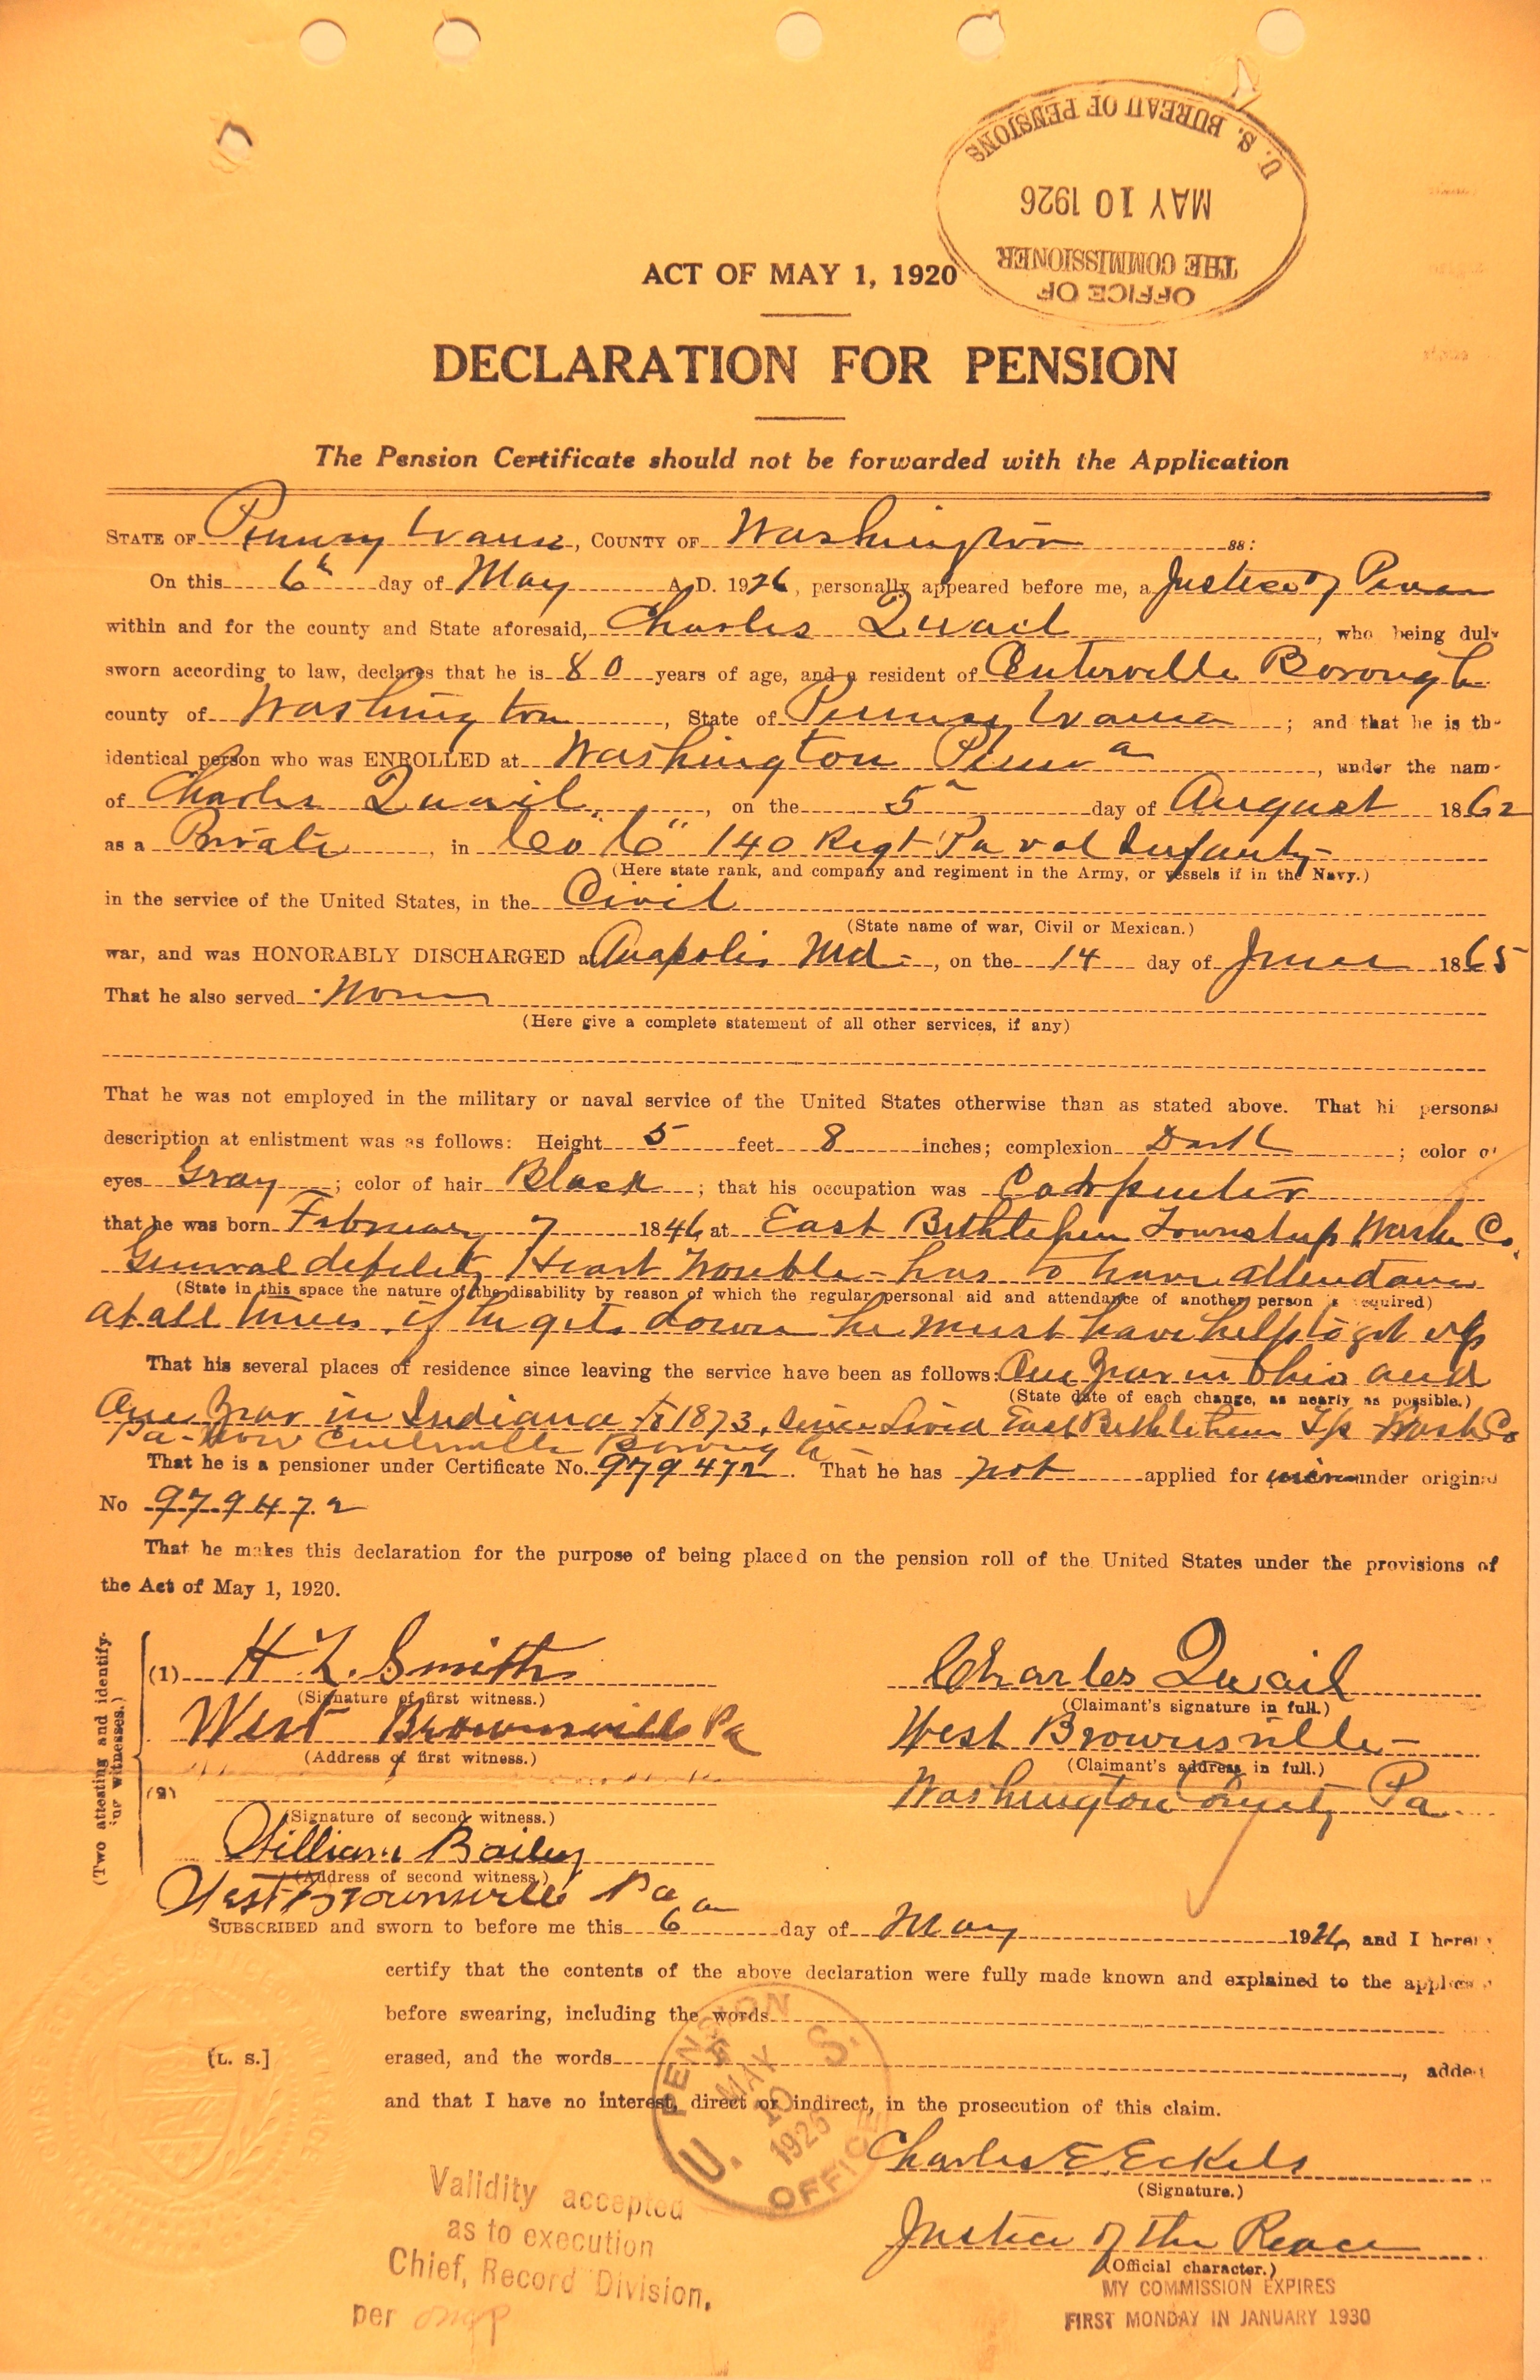 An application for a pension under the act of May 1, 1920